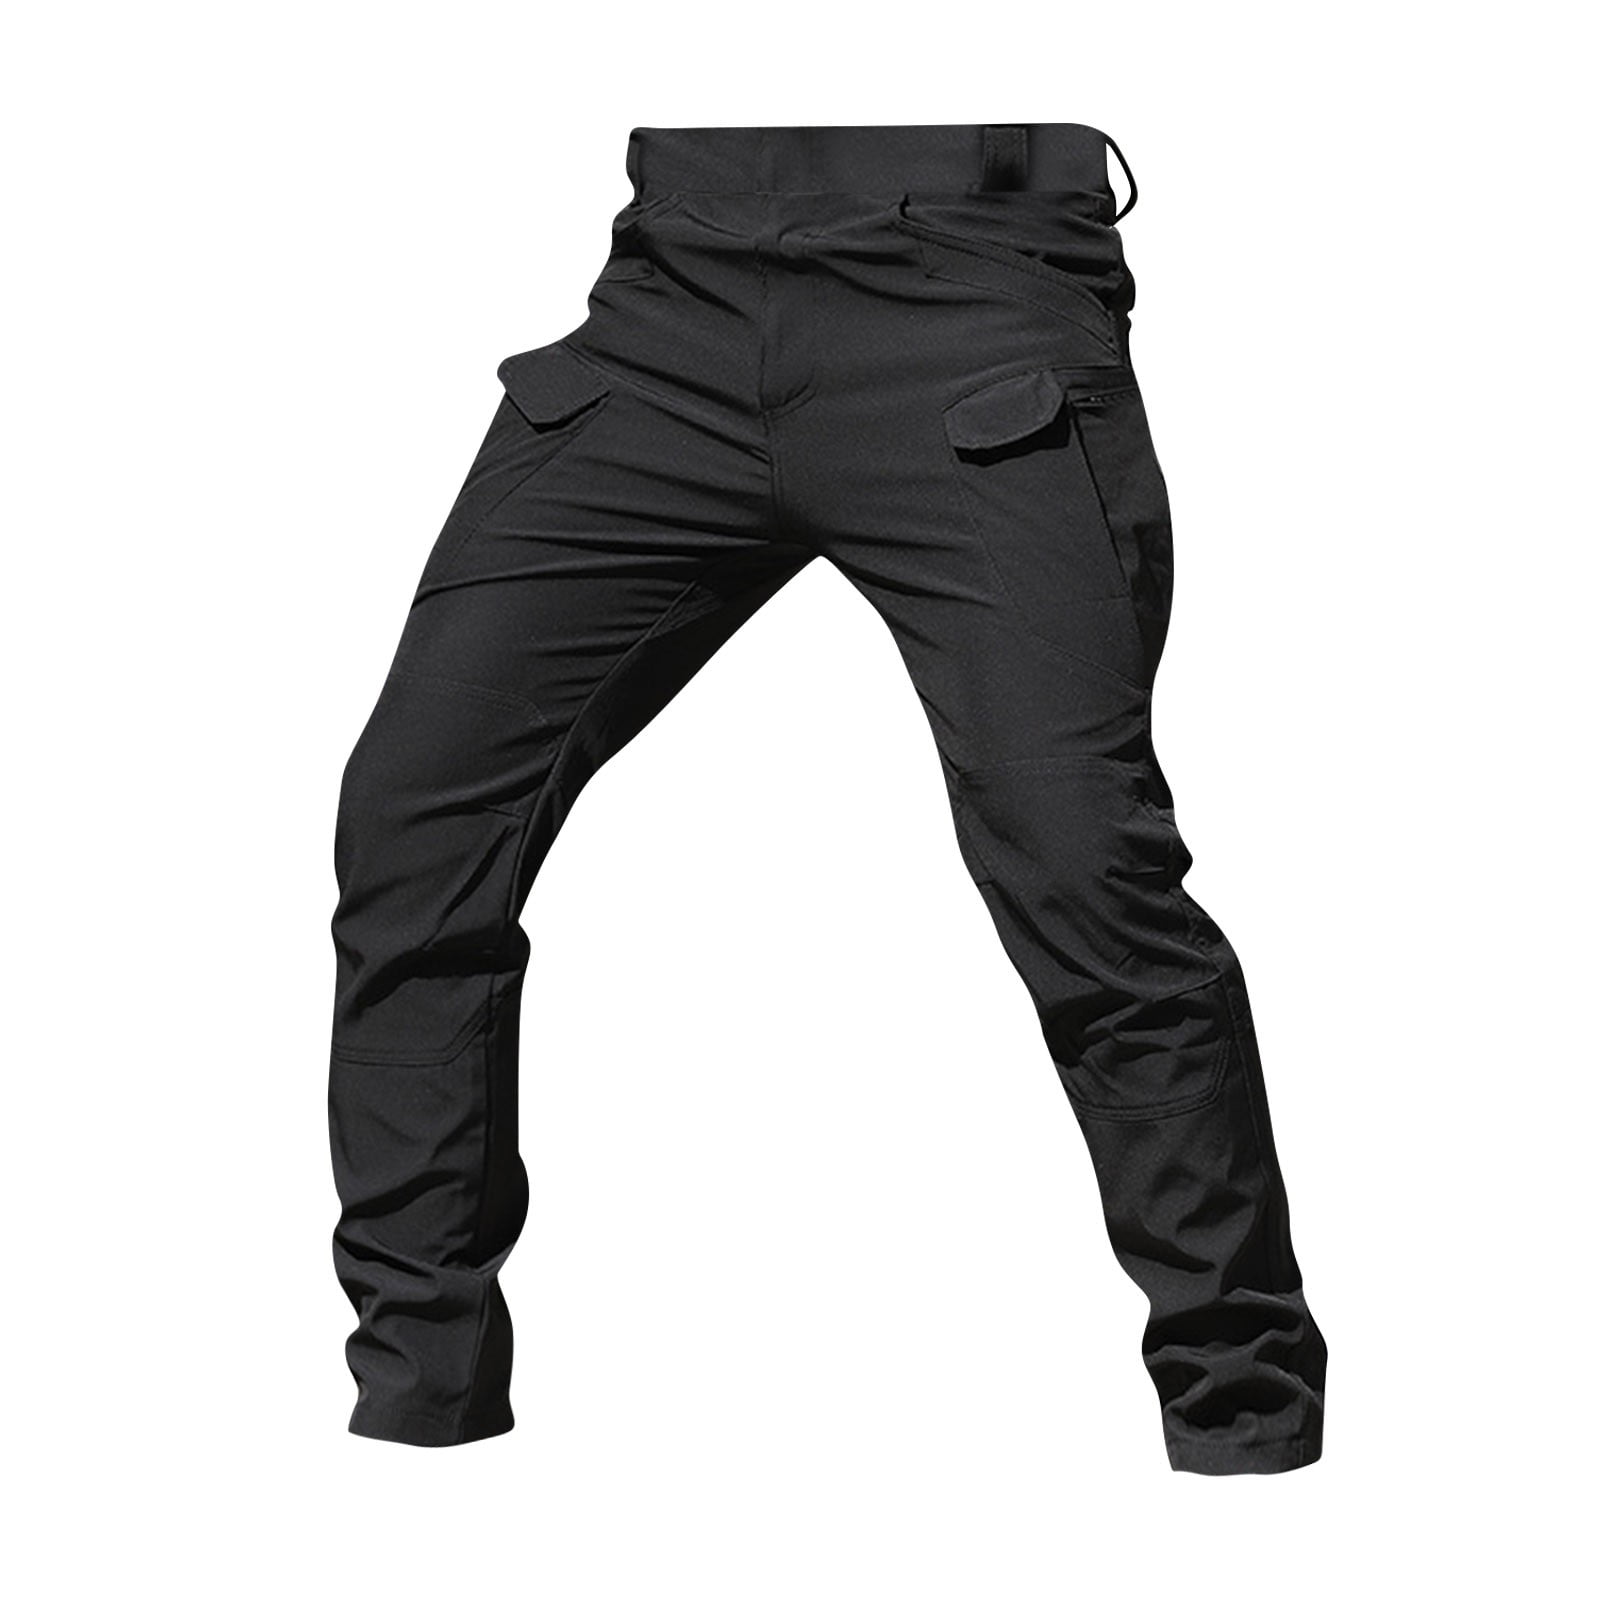 Multi-Pocket Fashions Black Army Trousers Casual Pants Men Military  Tactical Joggers Camouflage Cargo Pants Tactical Pants